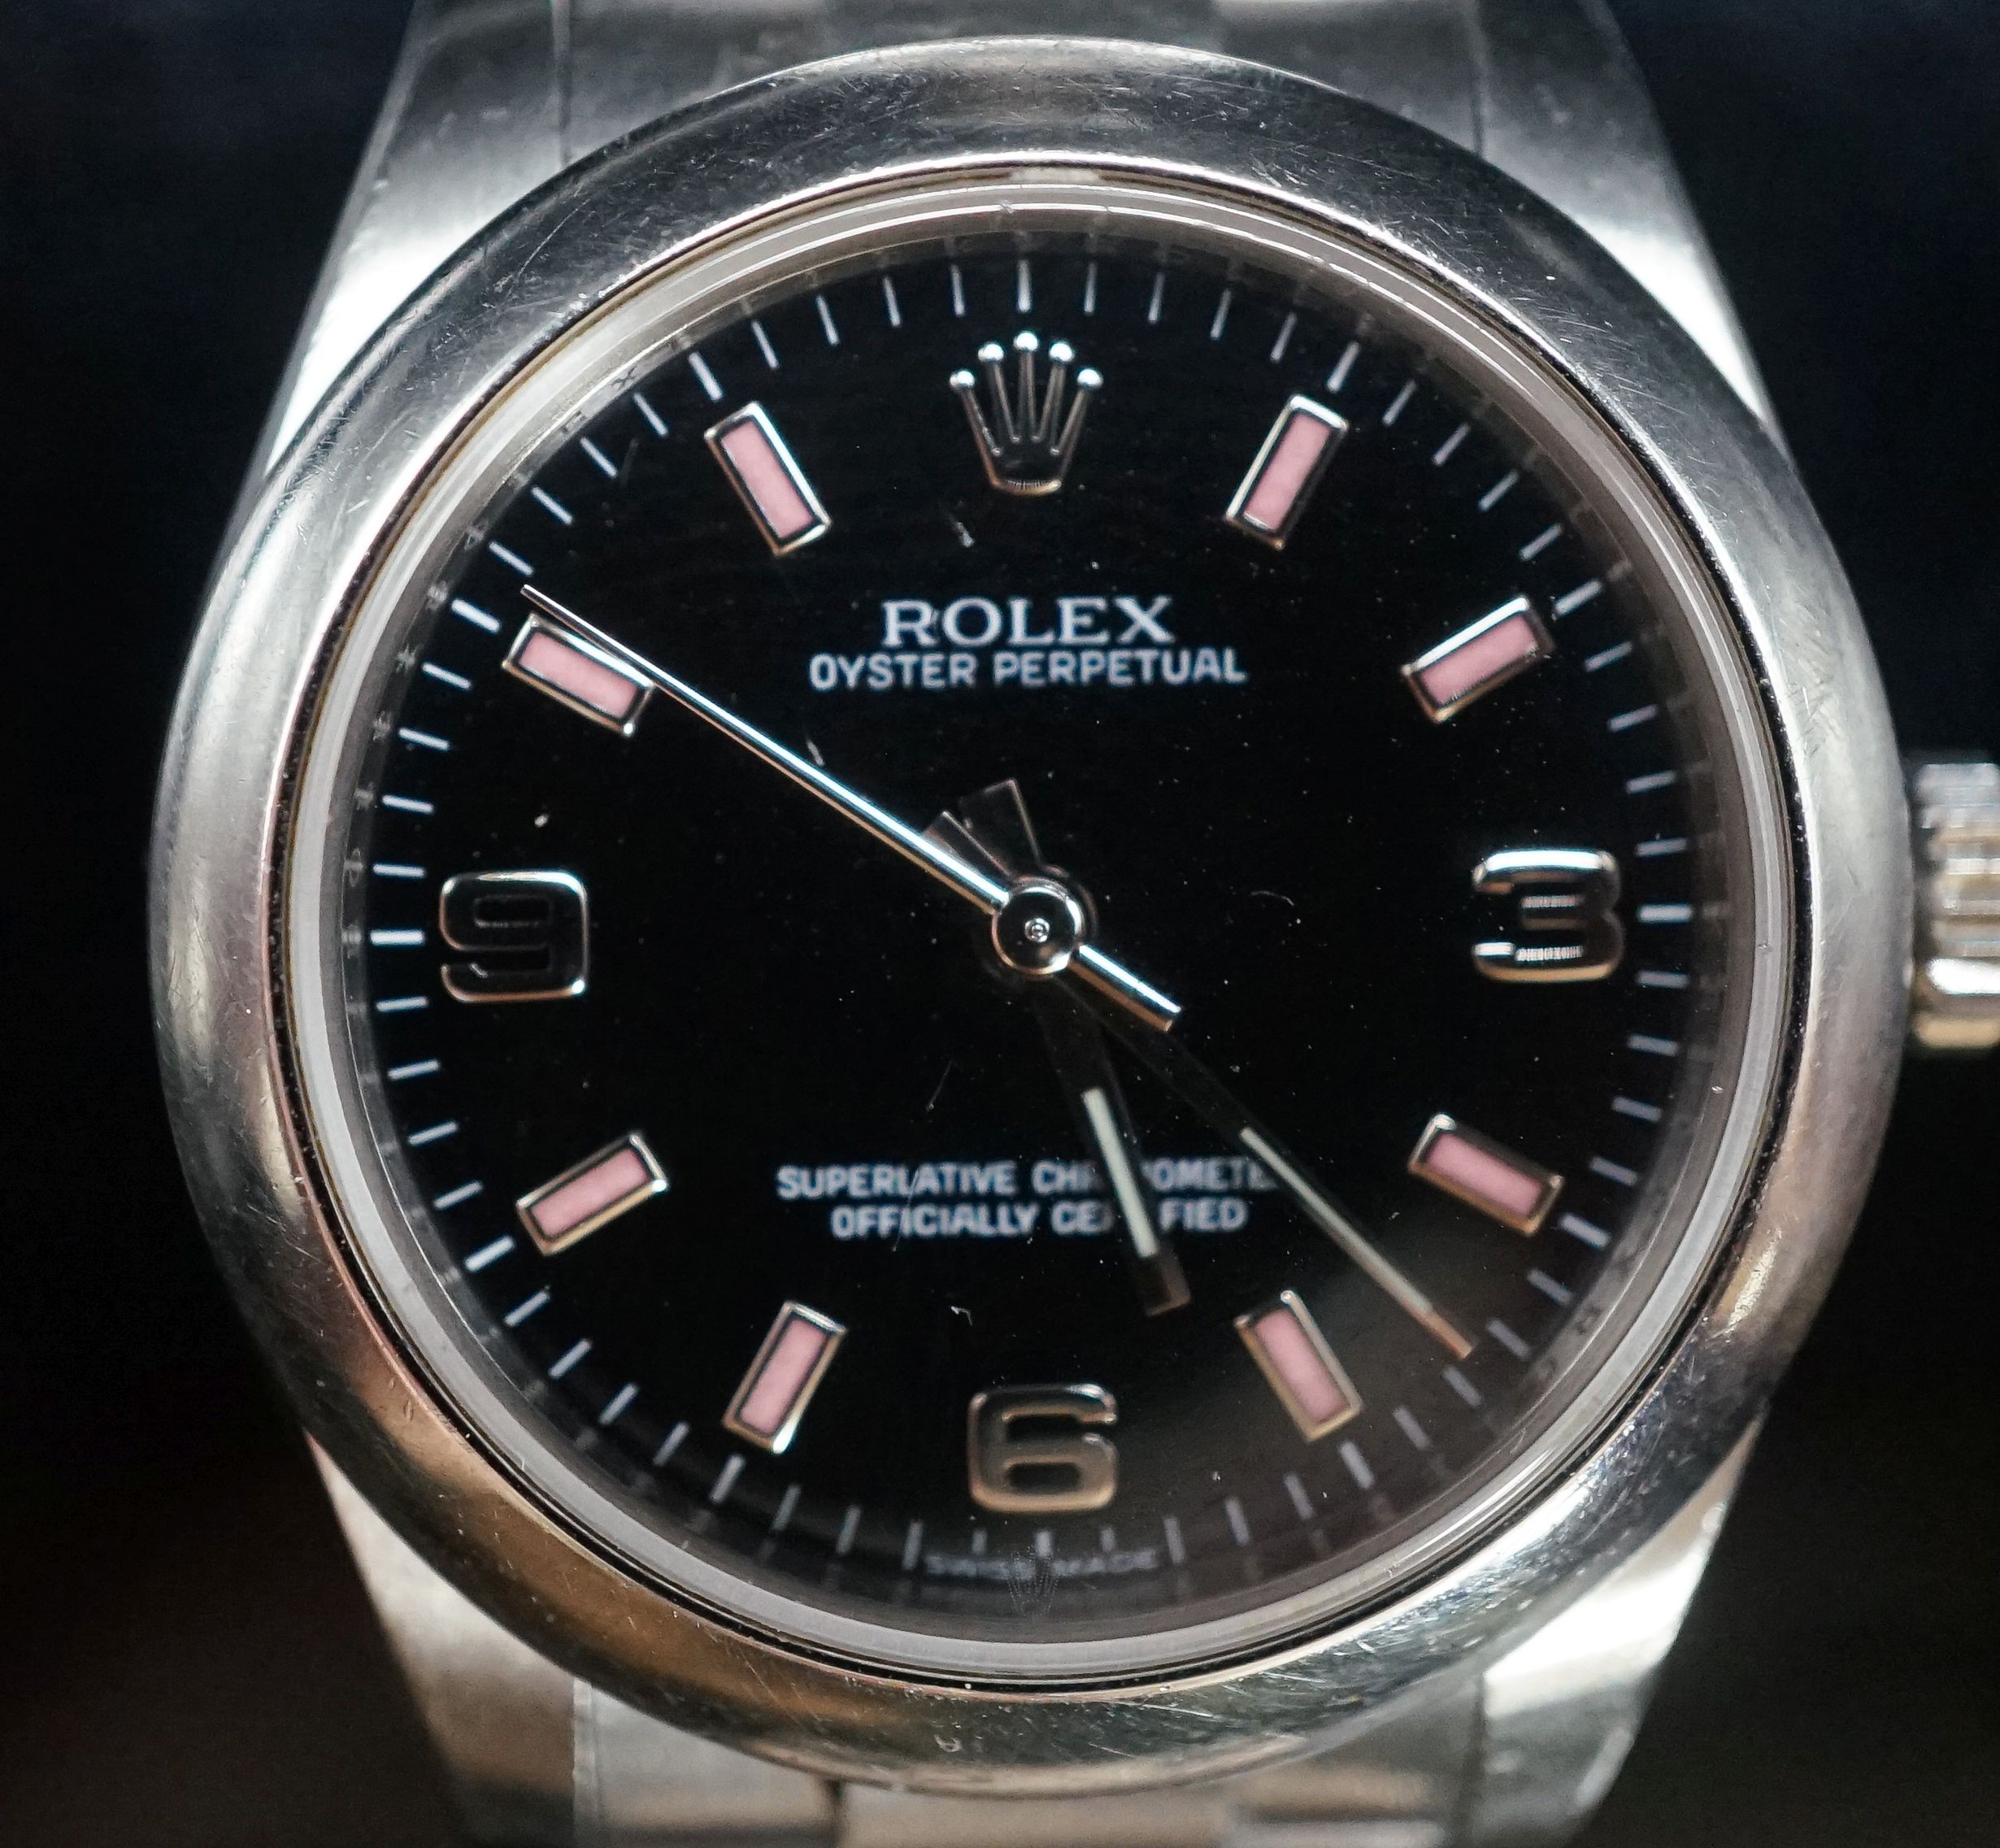 A lady's modern stainless steel Rolex Oyster Perpetual wrist watch, on a stainless steel Rolex bracelet, case diameter 31mm, no box or papers.